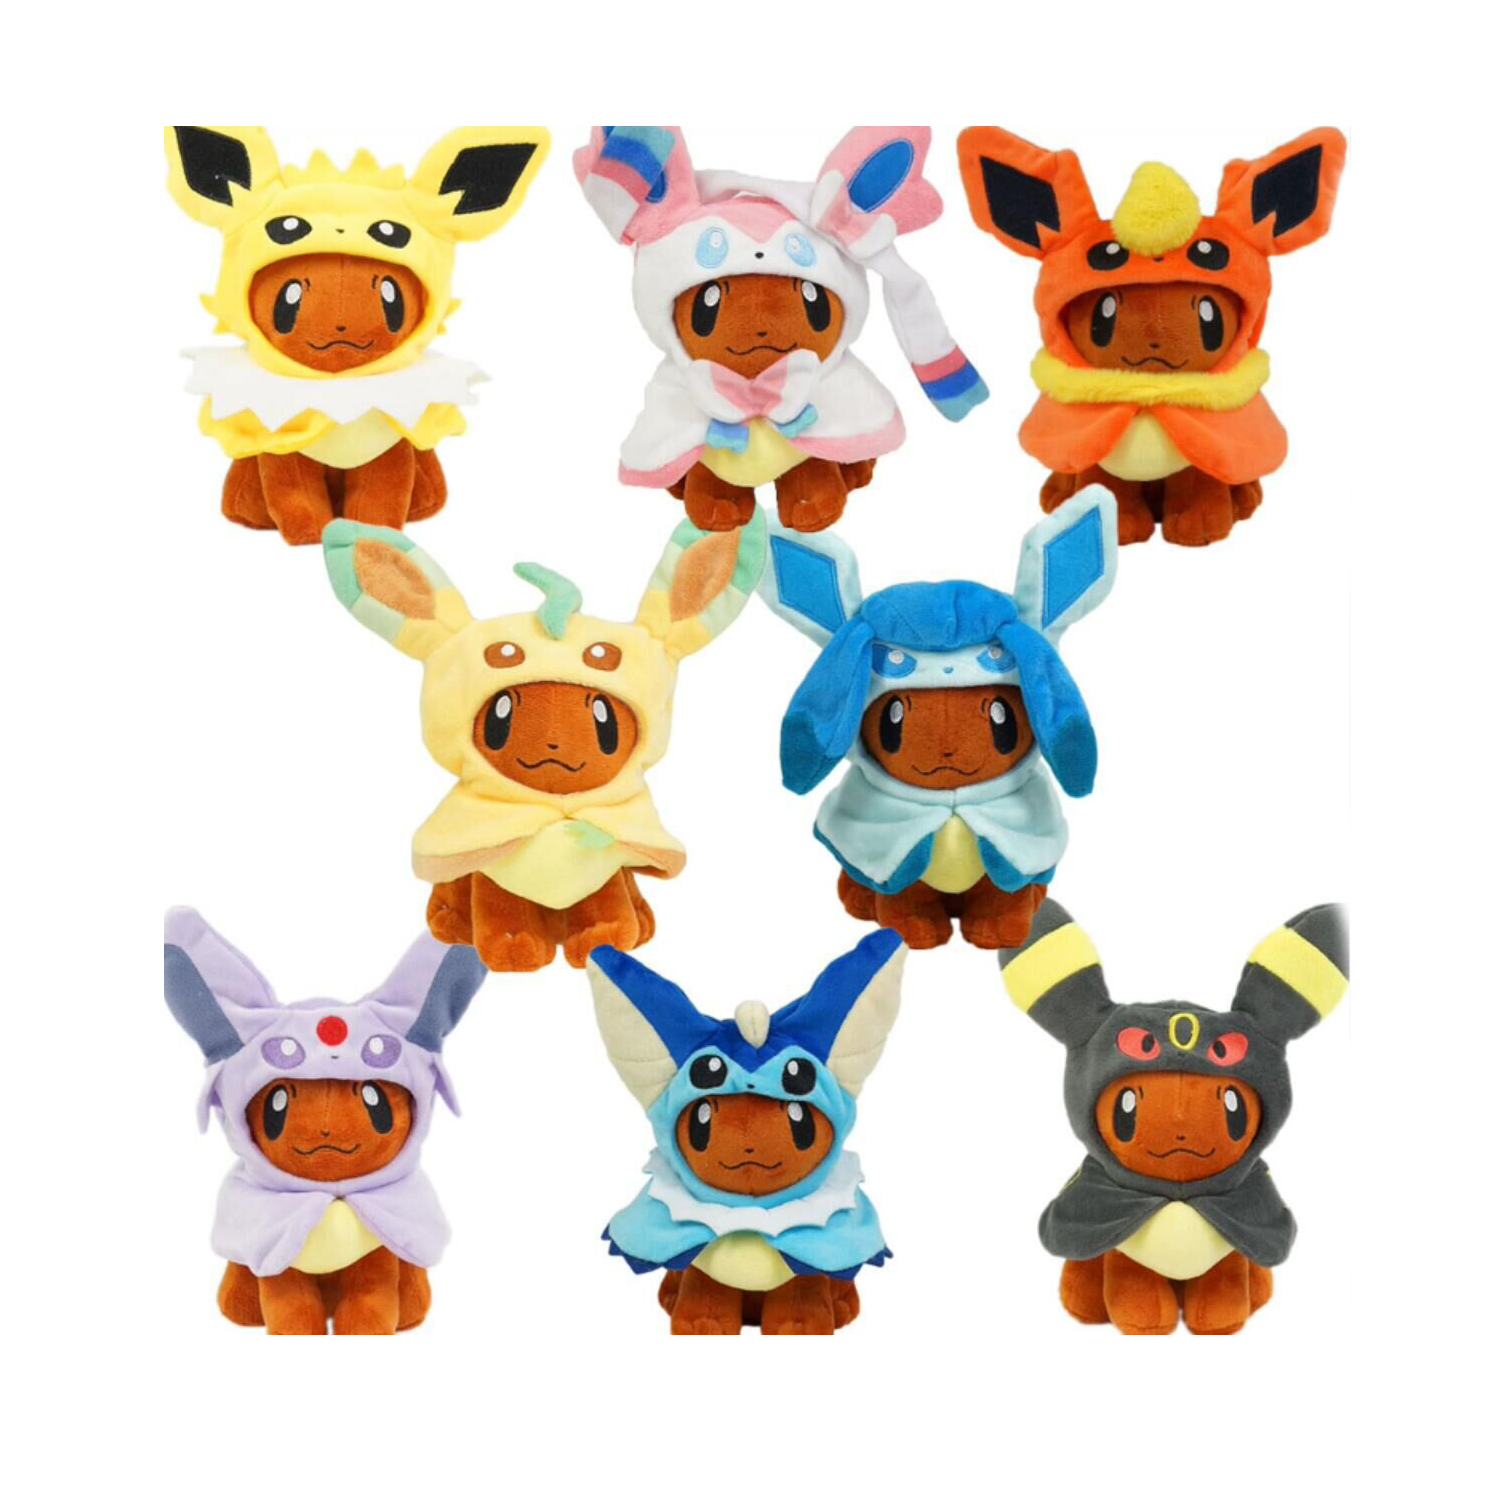 

New Toy Eevee Cosplay Jolteon Espeon Umbreon Flareon Glaceon Vaporeon Sylveon Soft Doll Plush Toy For Kids Christmas Gifts 8" 20CM